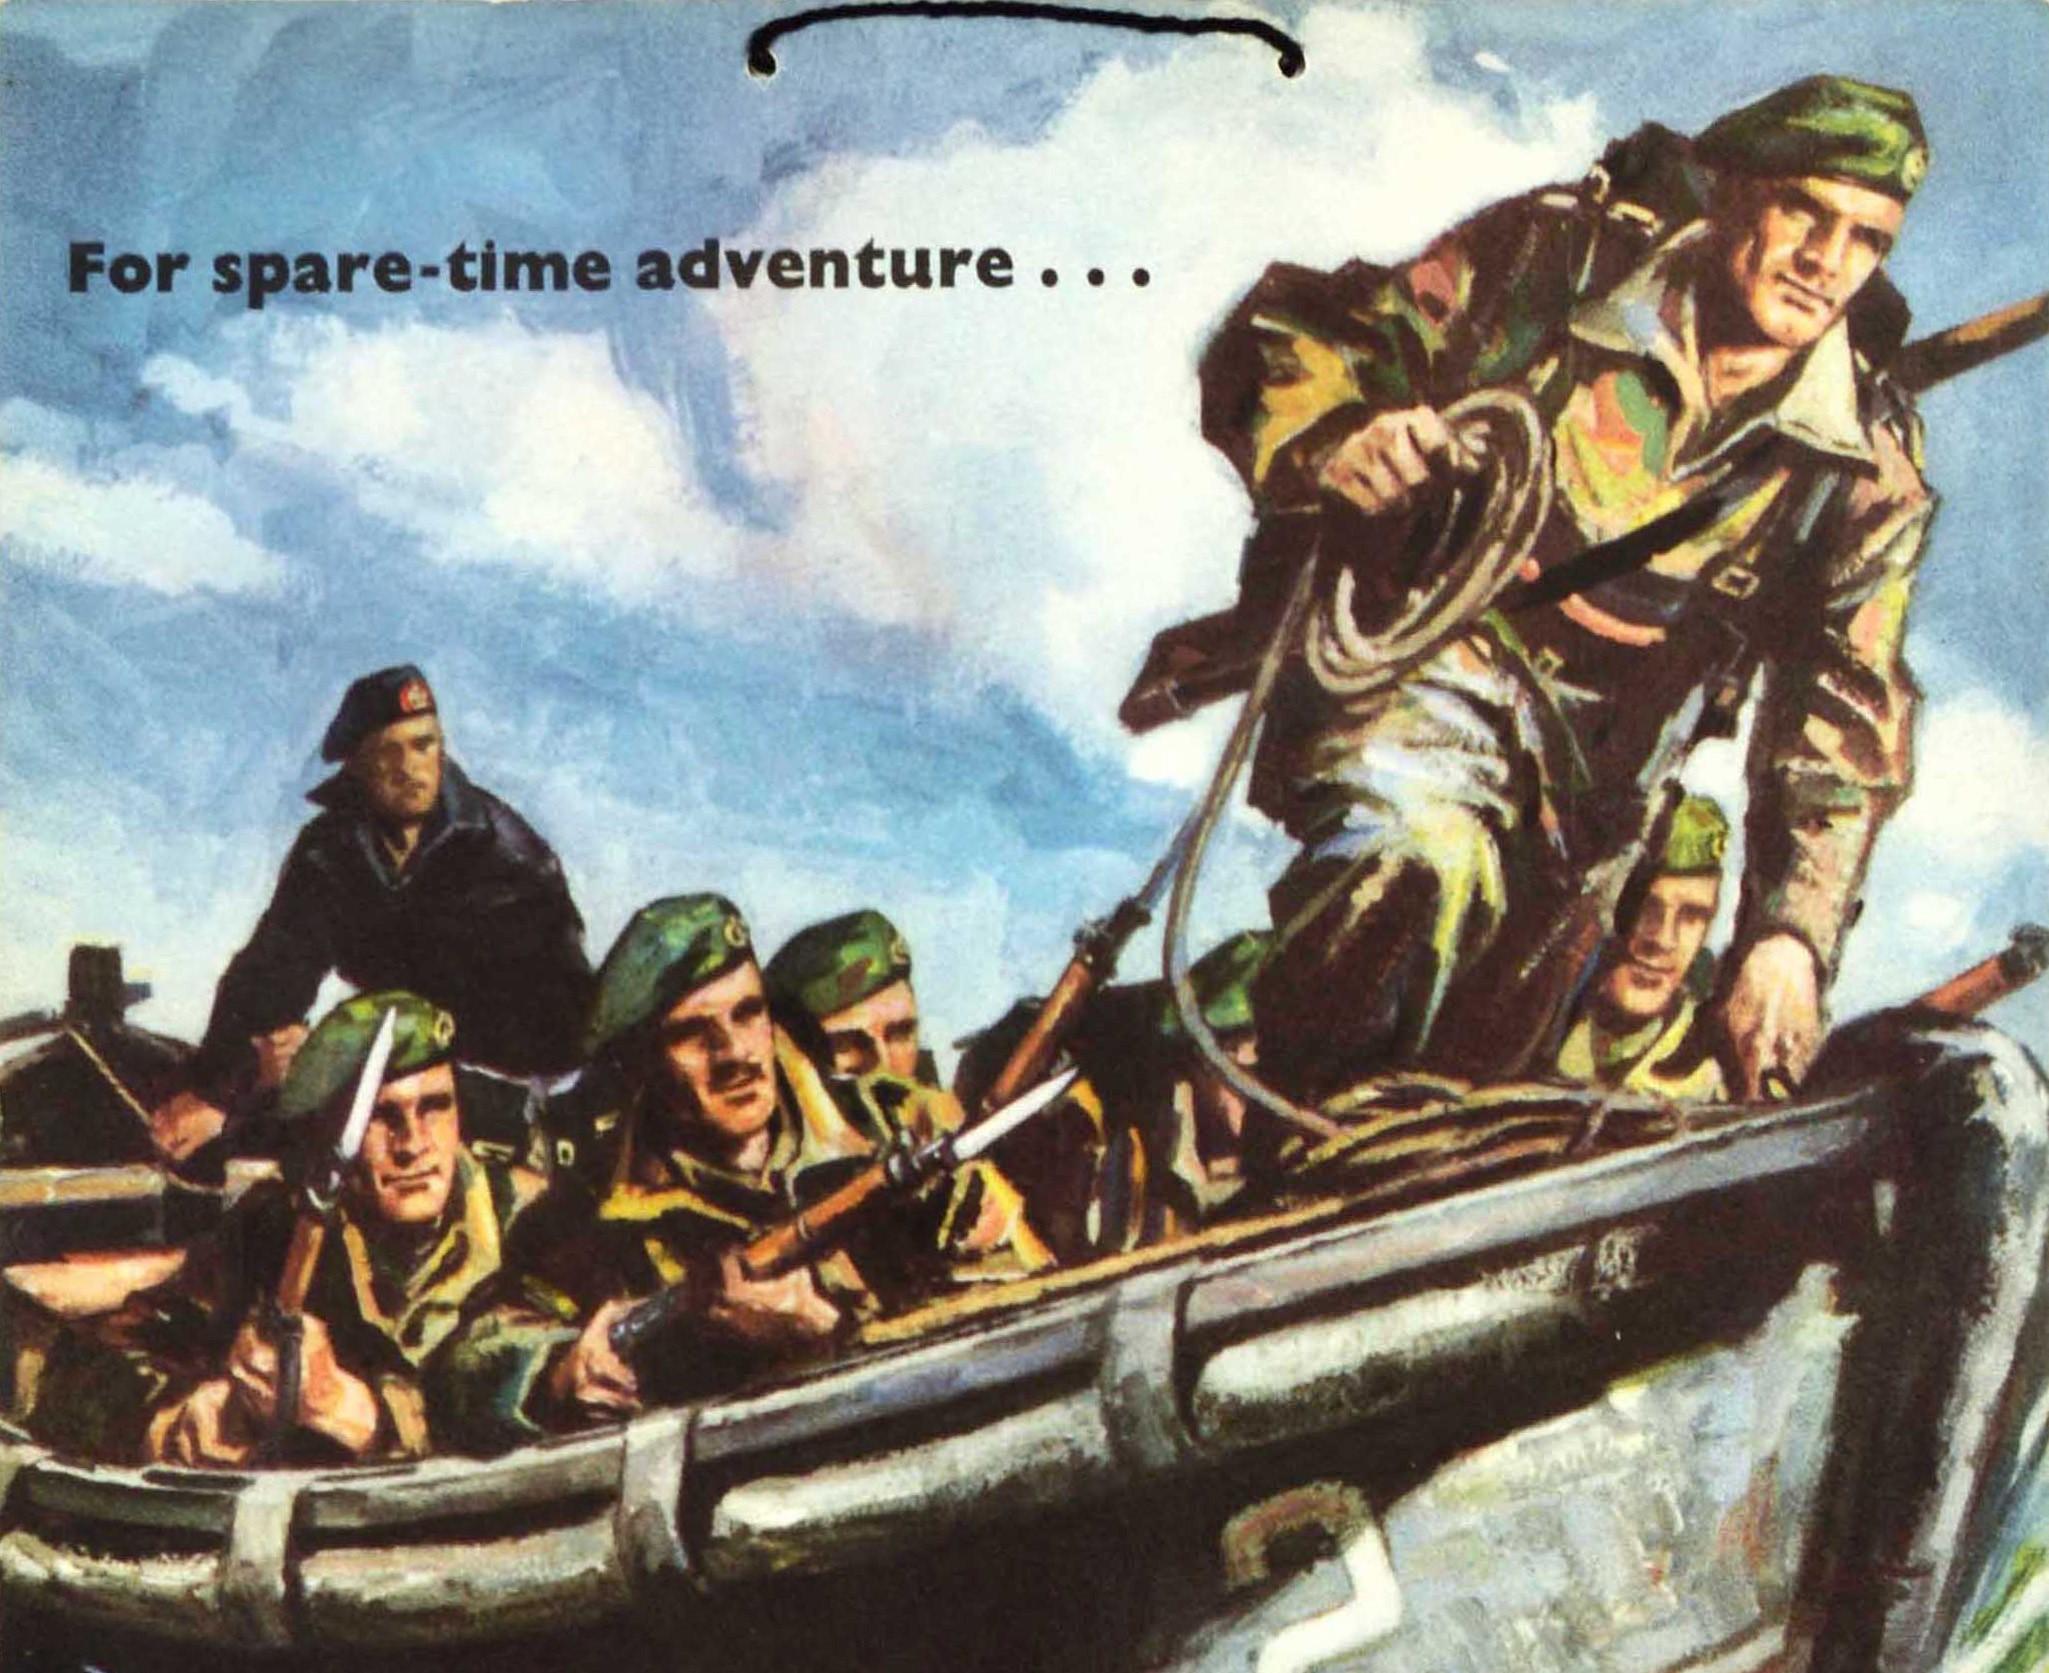 Original vintage recruitment poster - For spare time adventure... Royal Marines Forces Volunteer Reserve - featuring dynamic artwork depicting soldiers in military uniform armed with bayonet rifle guns in a navy speed boat with a man standing at the